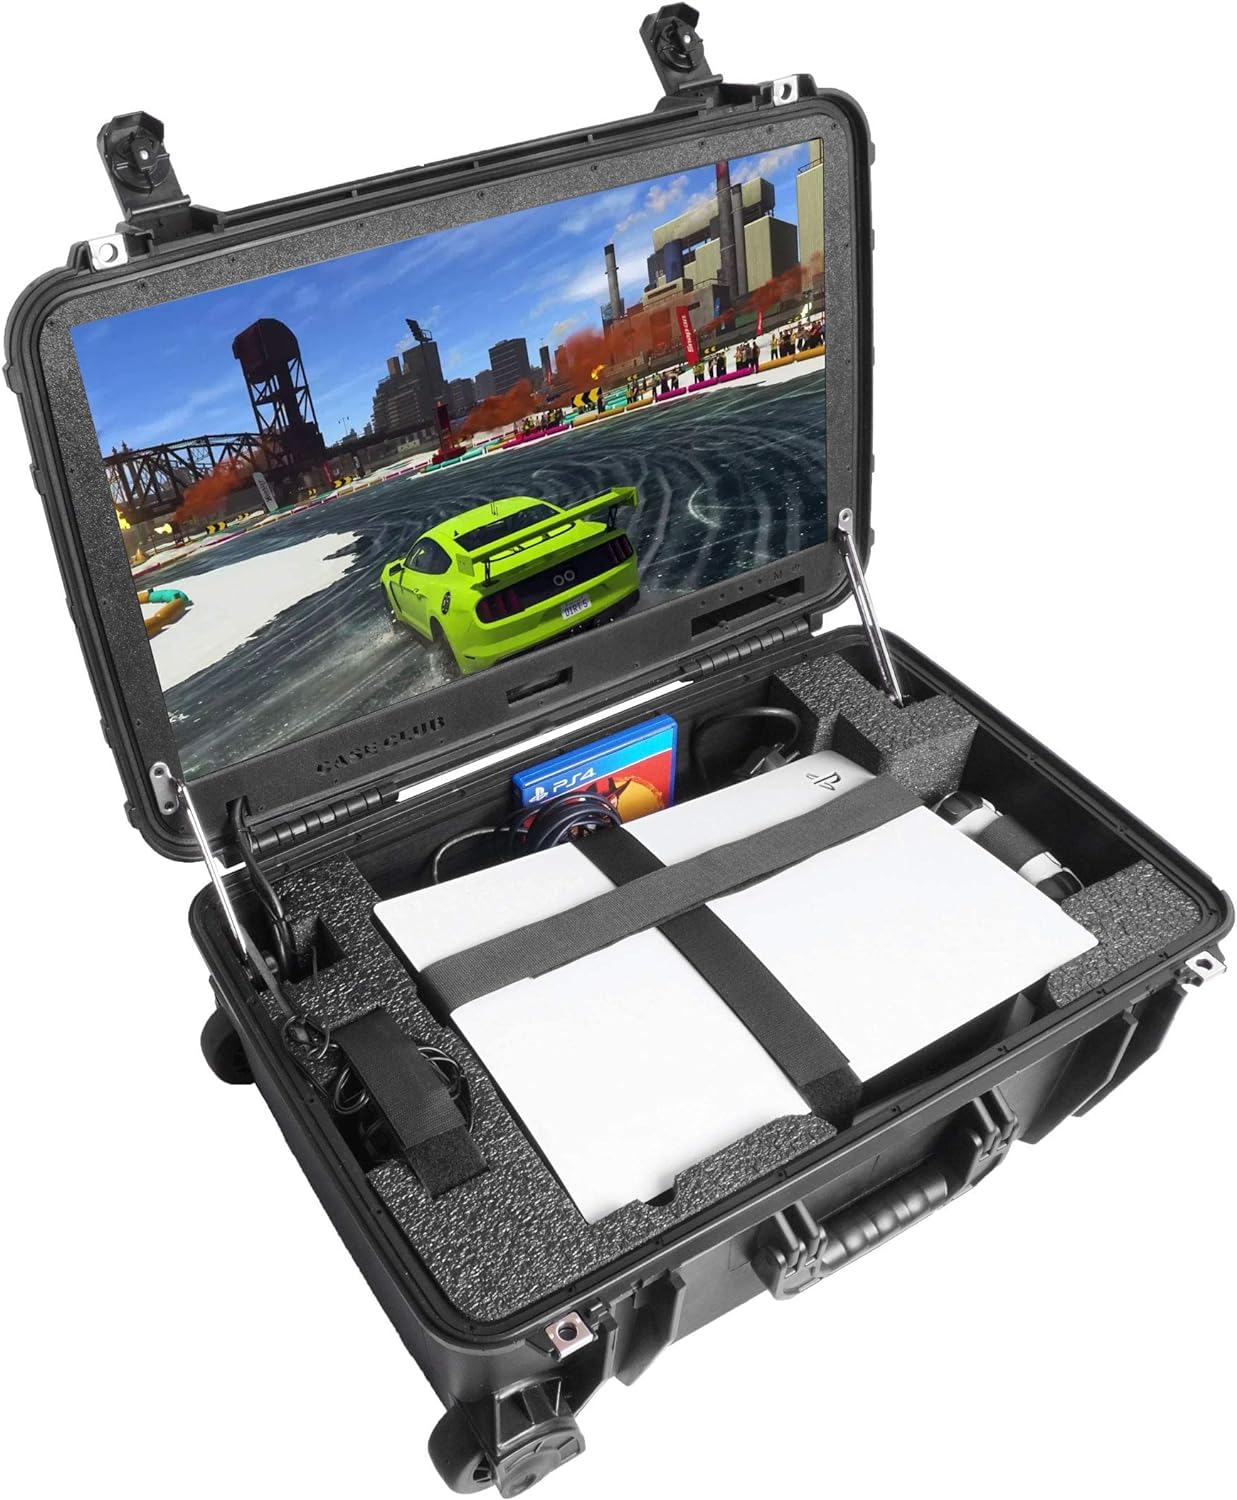 PS5 Case Club - Case with Built-in 24" 4K Monitor, Cooling Fans, & Speakers - Fits PS5 (Disc or Digital), Controllers, & Games